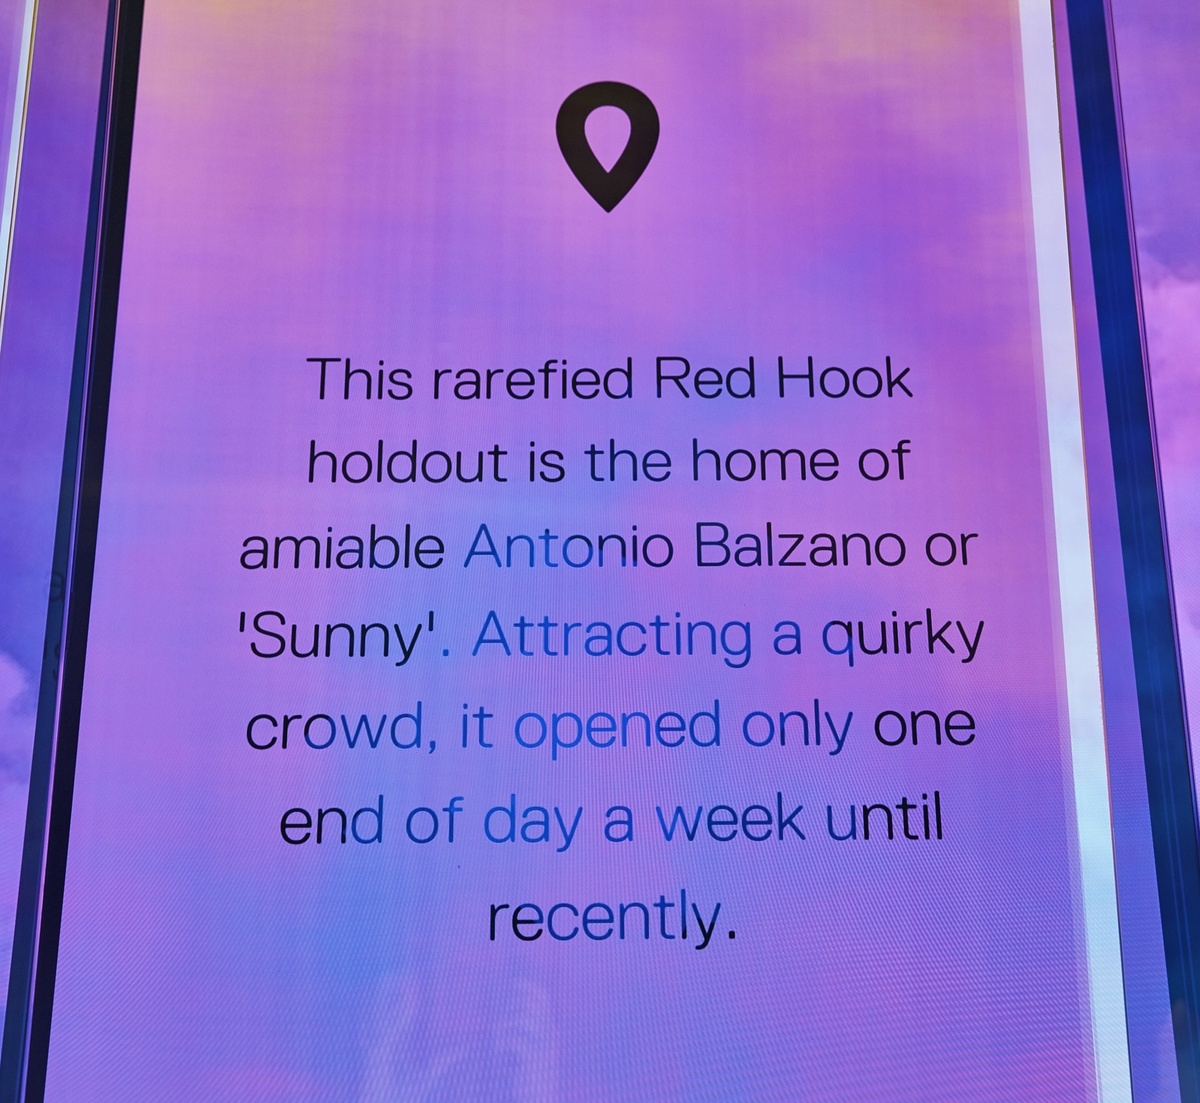 A moment of the experience that gives information about the location chosen, in this case, about the Red Hook